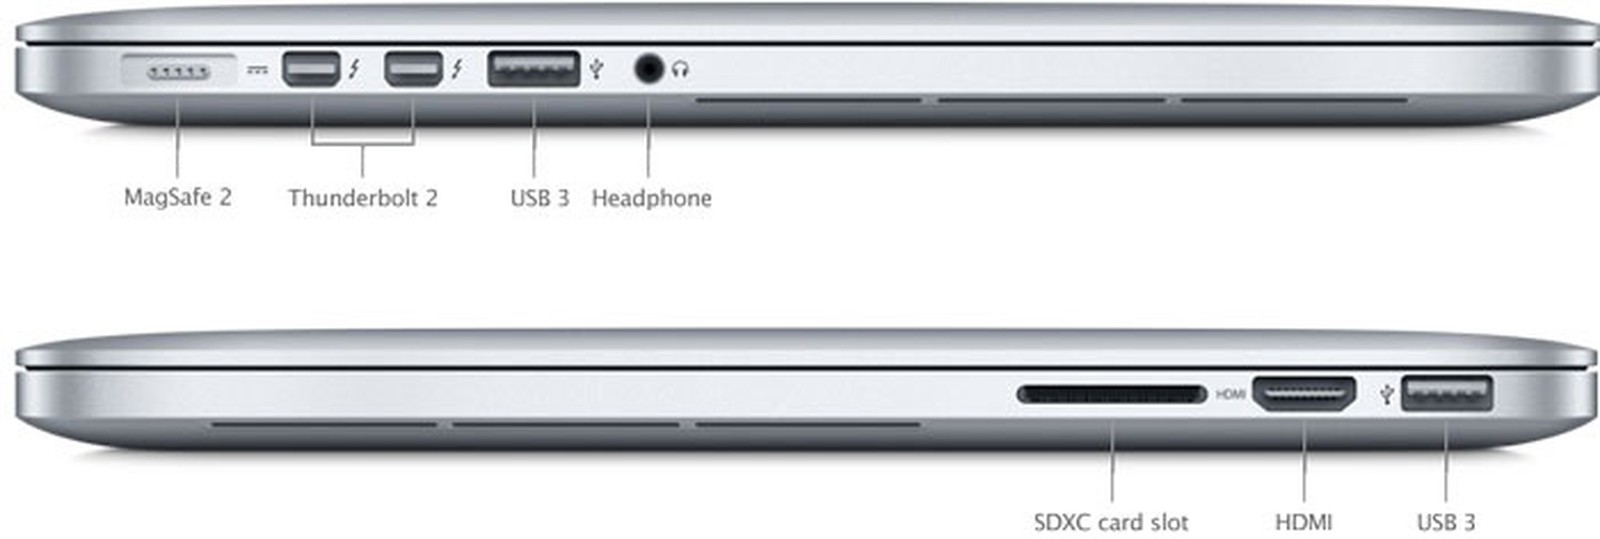 2021 MacBook Pro Rumored to Feature More Ports: Here's a ...